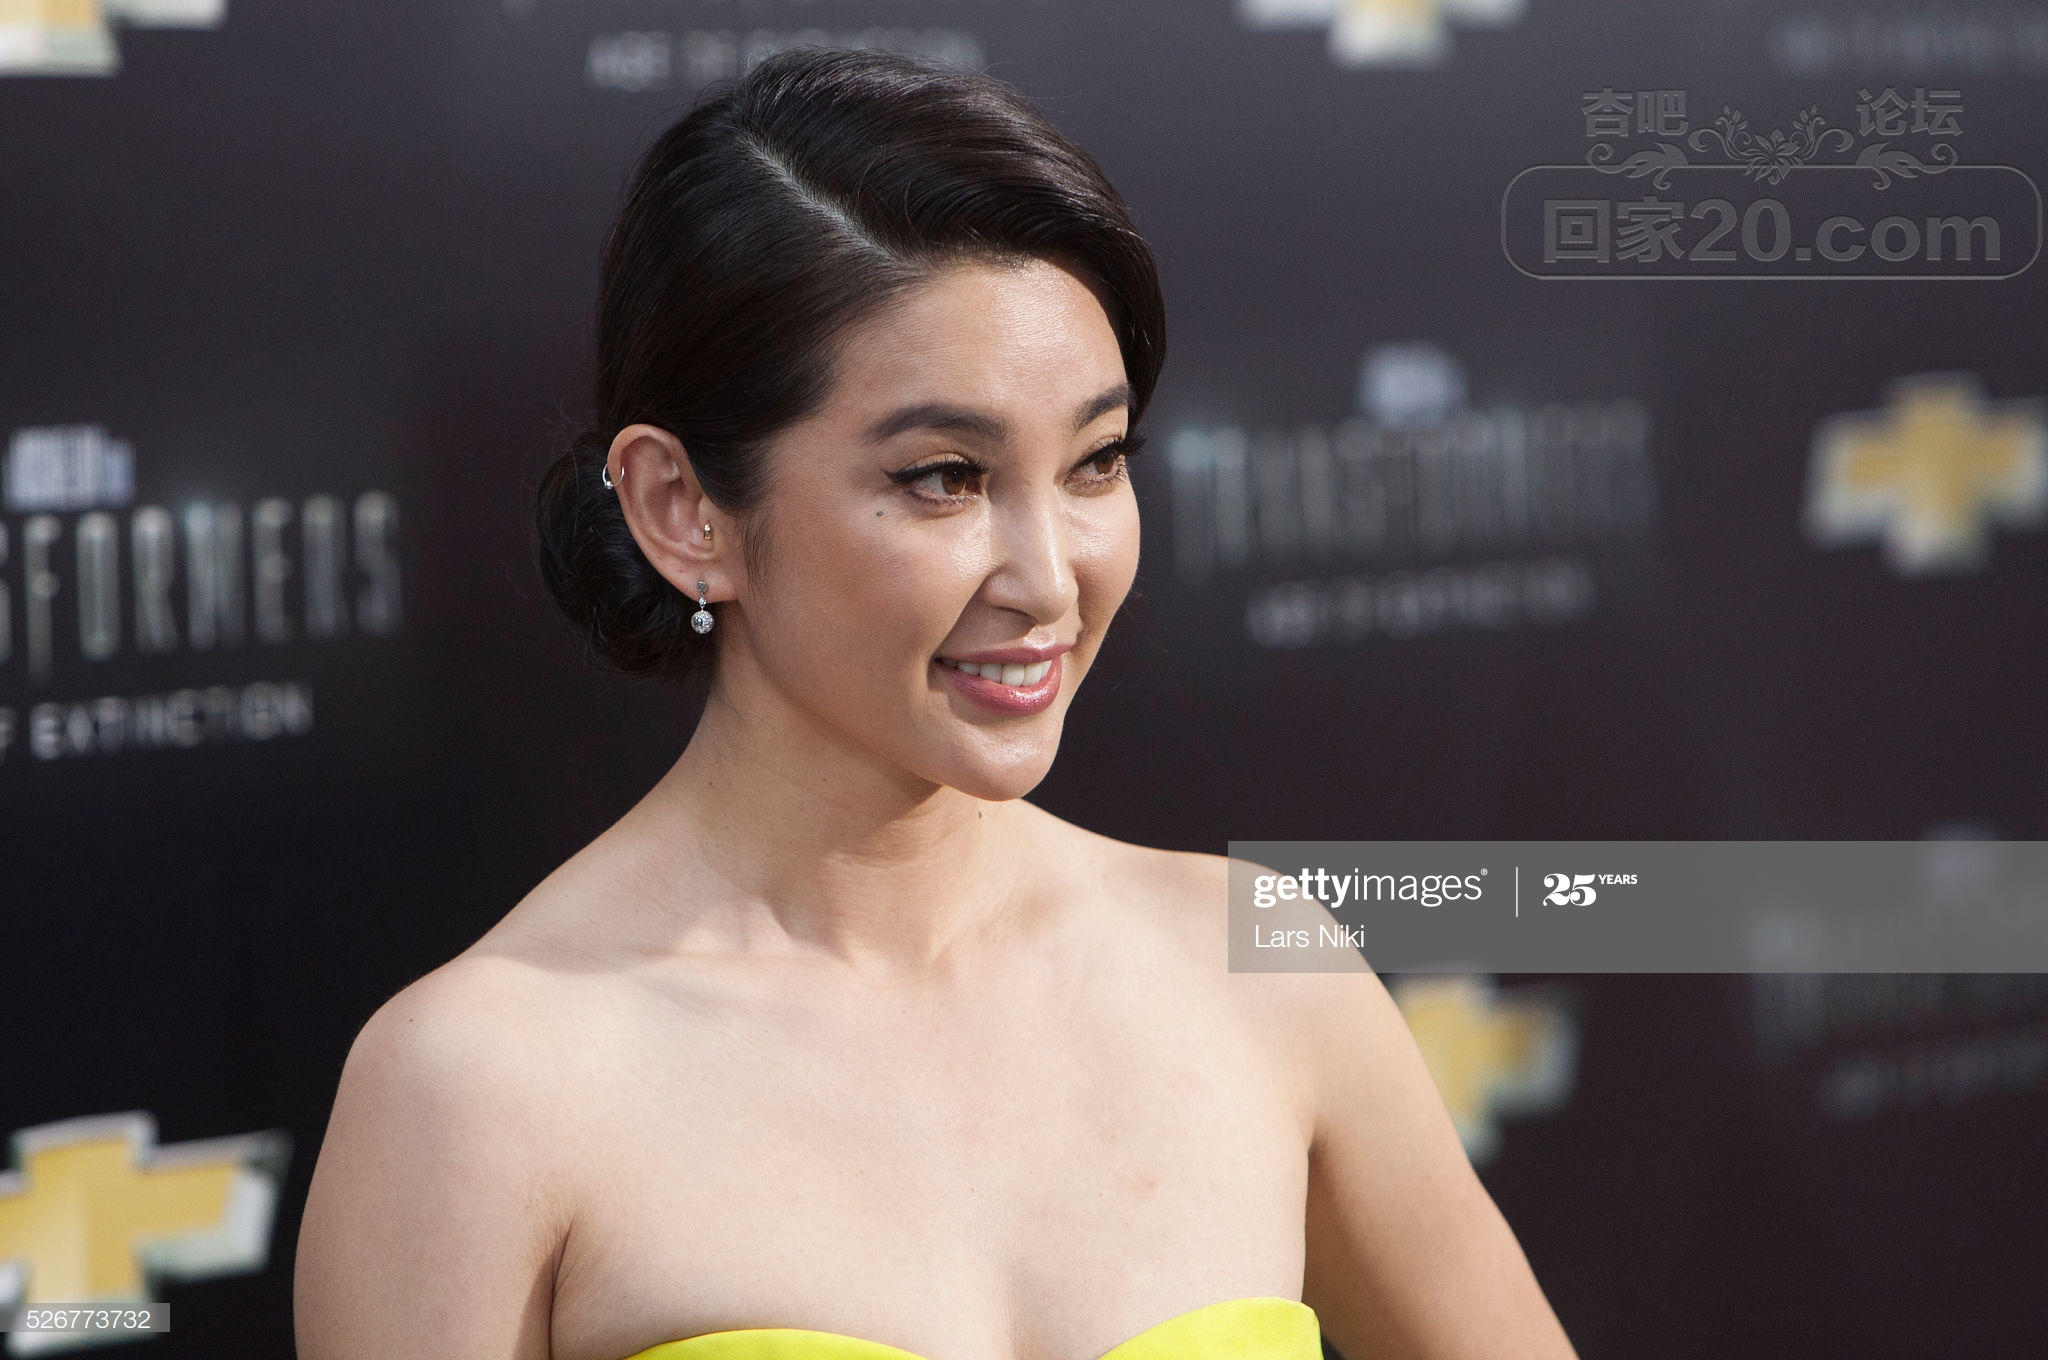 gettyimages-526773732-2048x2048.jpg